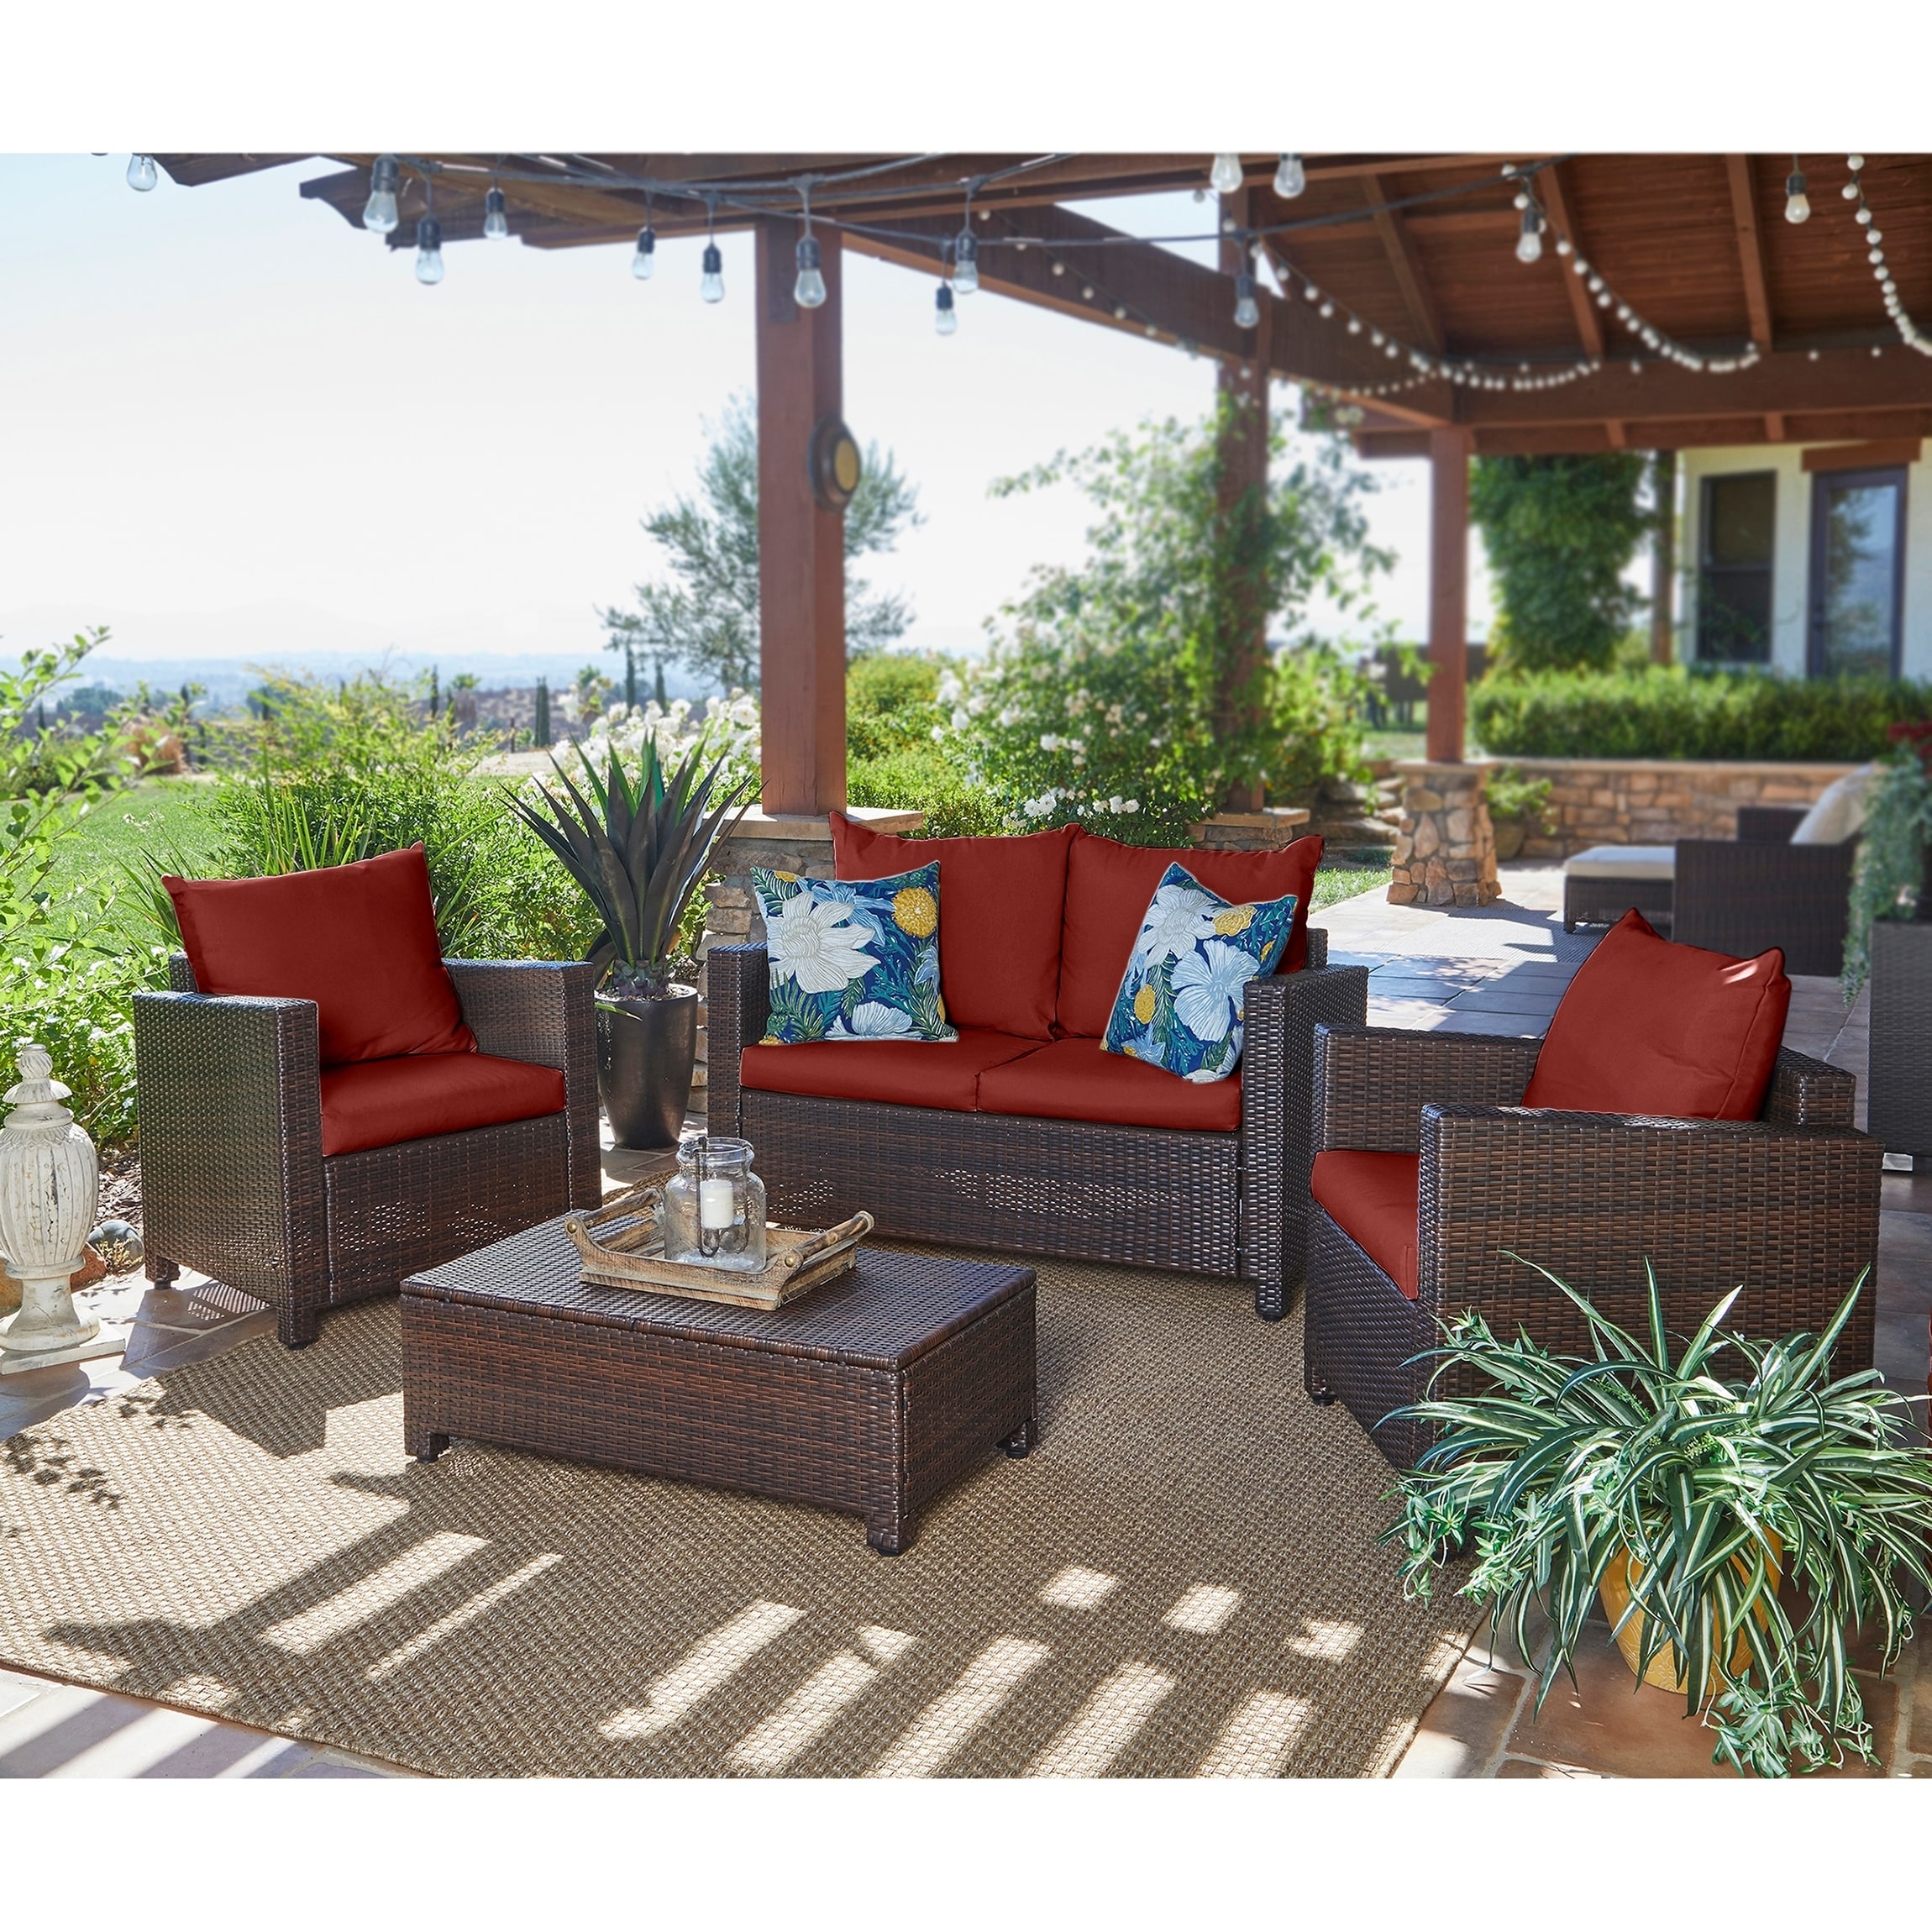 Havenside Home Stillwater Indoor/Outdoor 4 Piece Brown Resin Rattan Seating Group with Terracotta Cushions